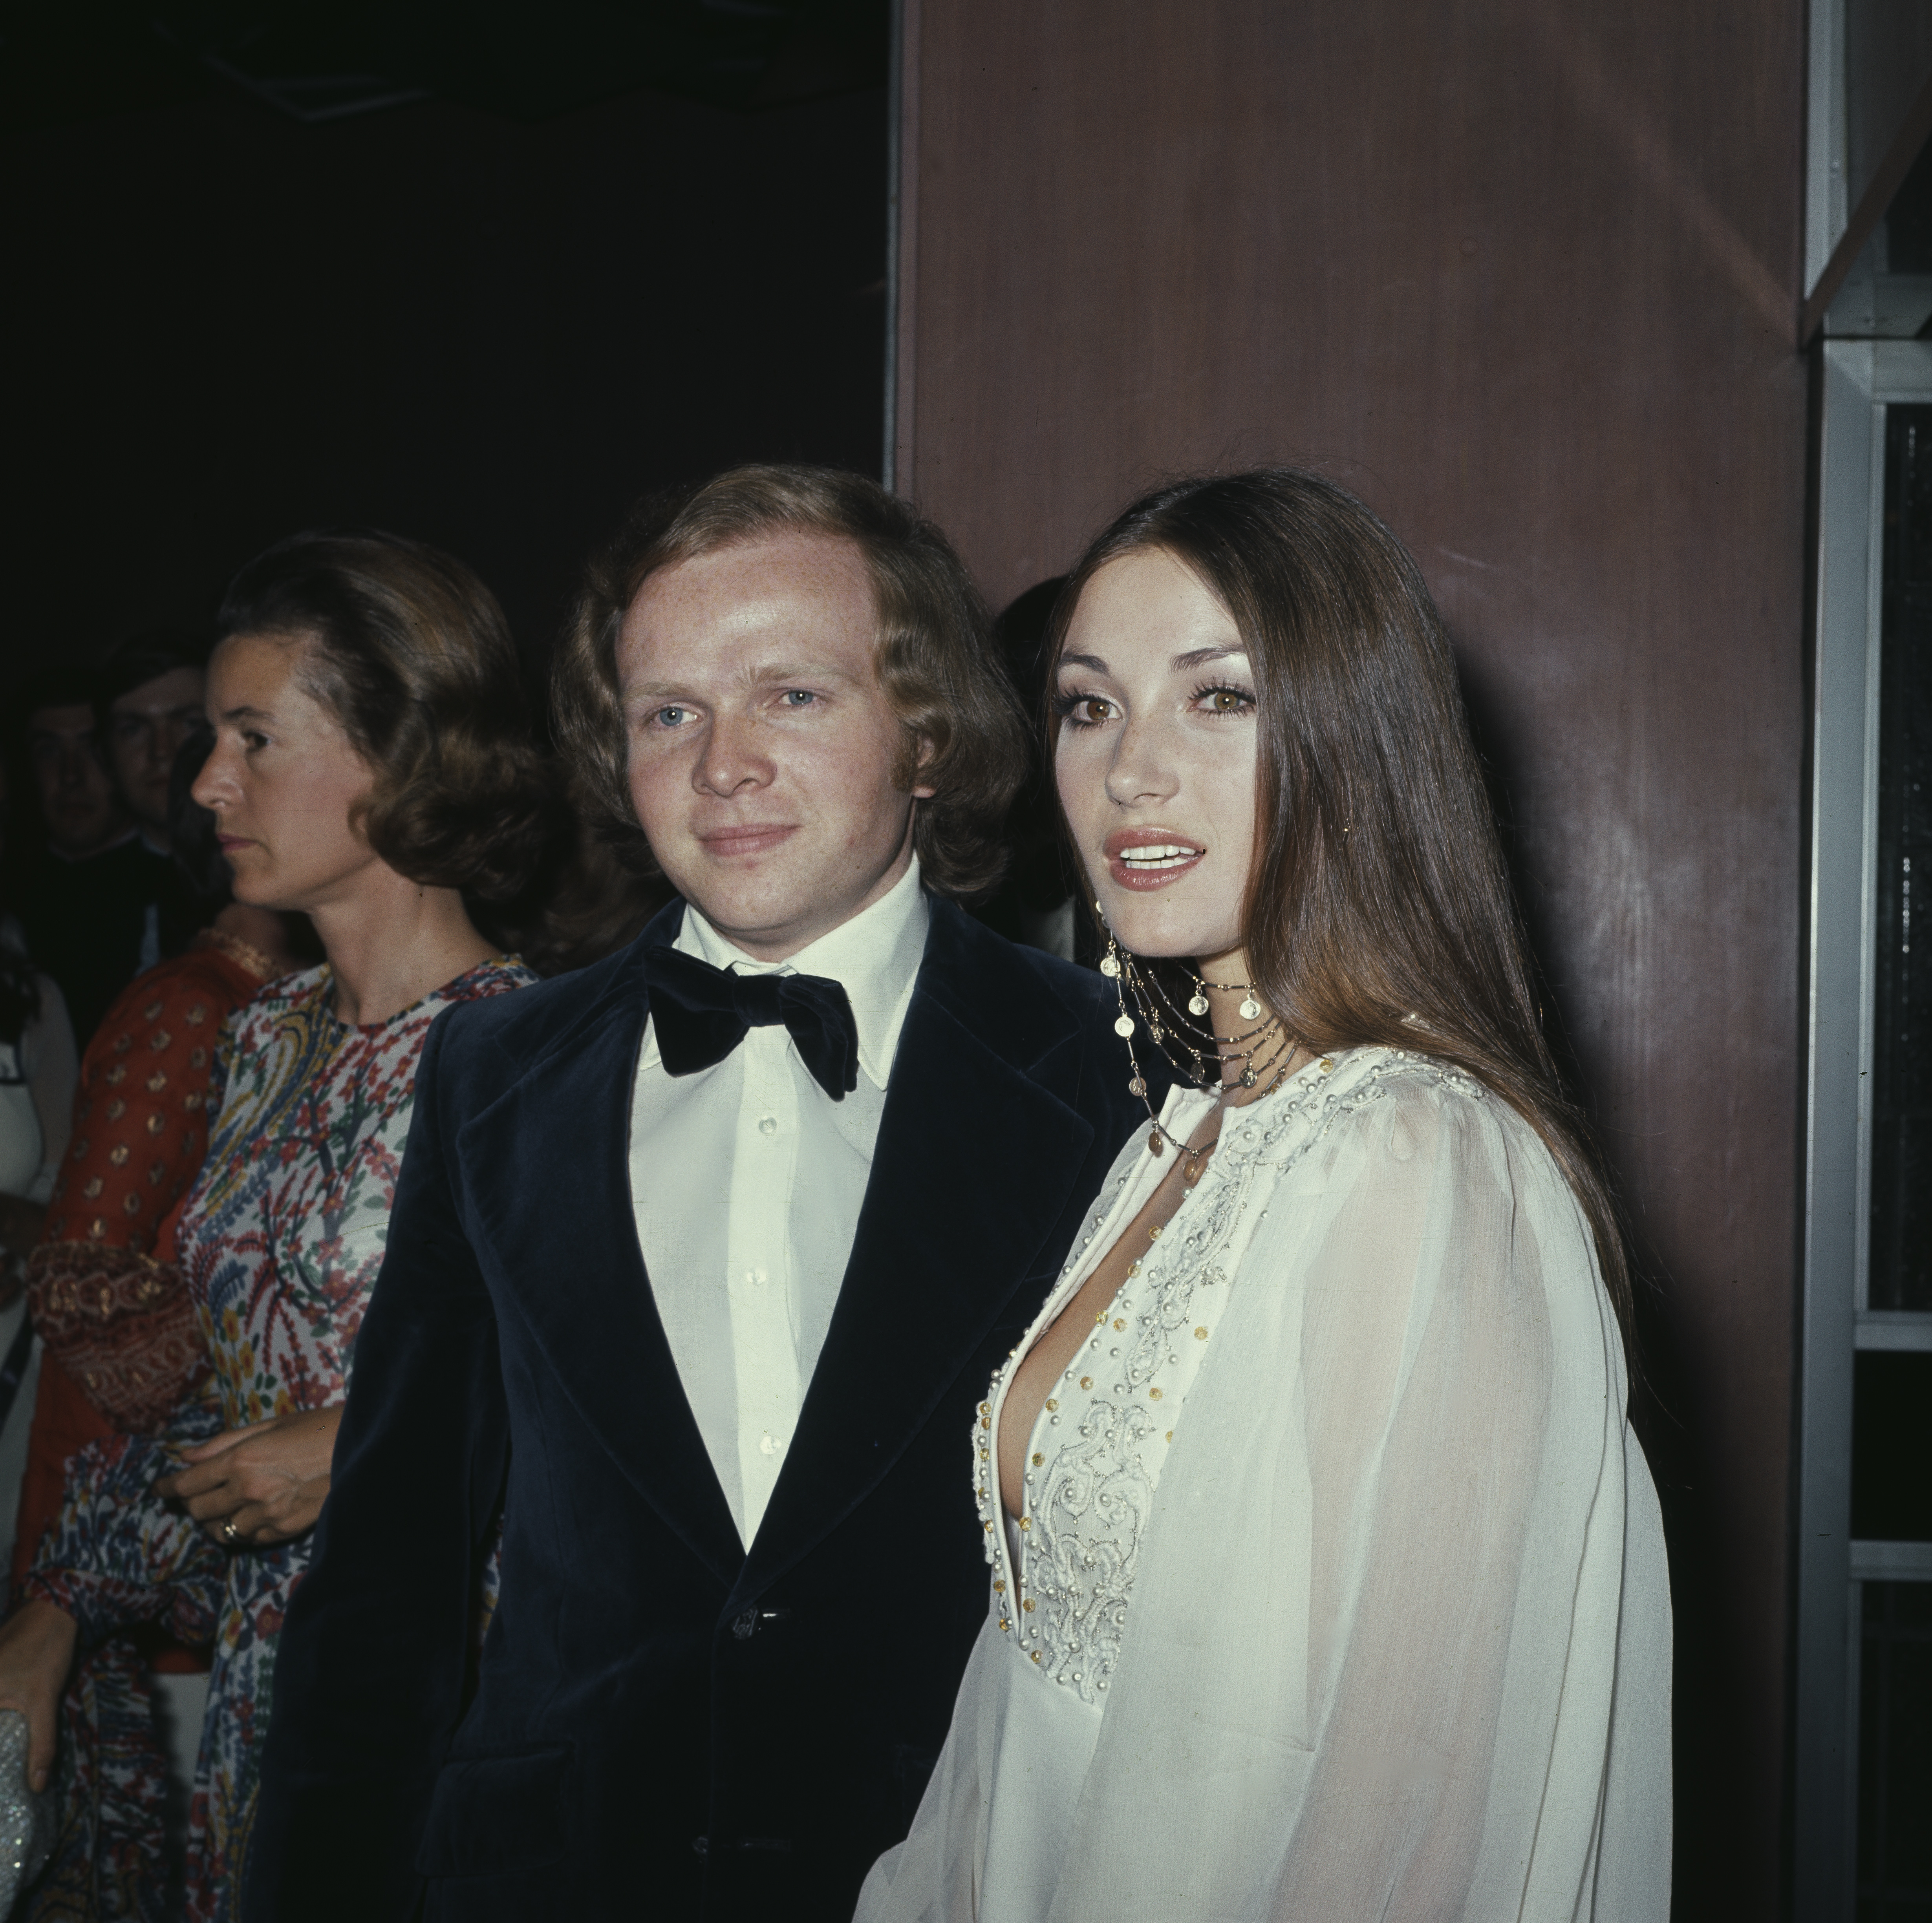 Michael Attenborough and Jane Seymour at the Royal premiere of "Live and Let Die," 1973 | Source: Getty Images